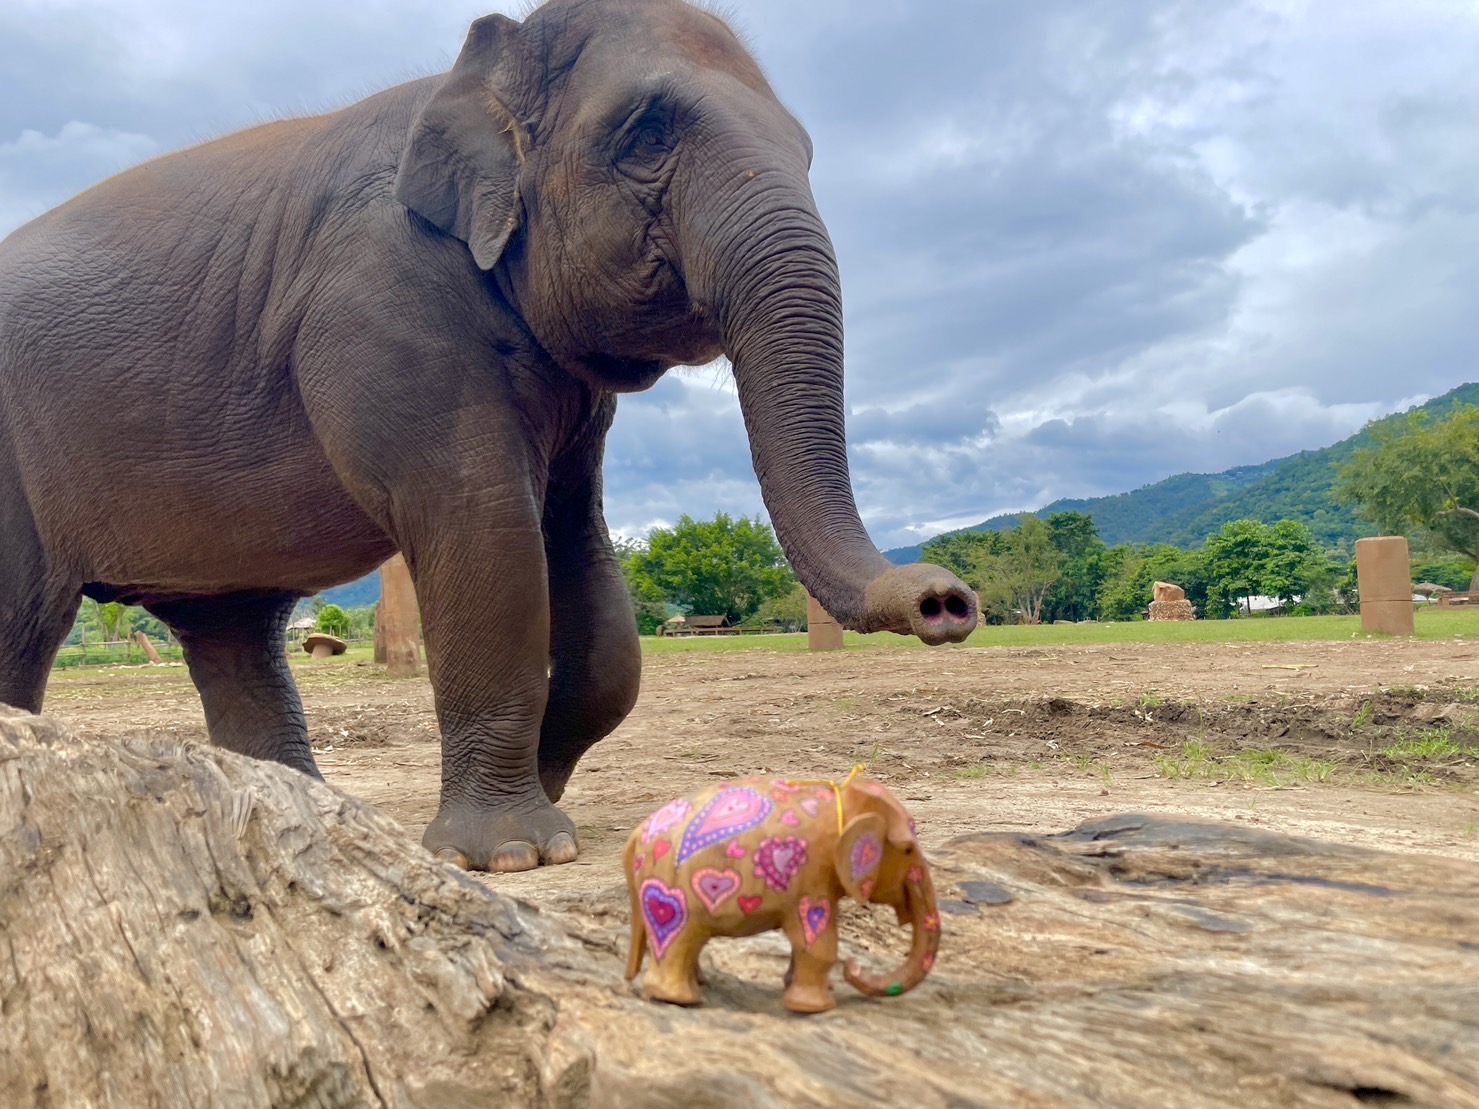 Artist Heather Anderson donates Elephant Carvings to the Elephant Nature Park Shop